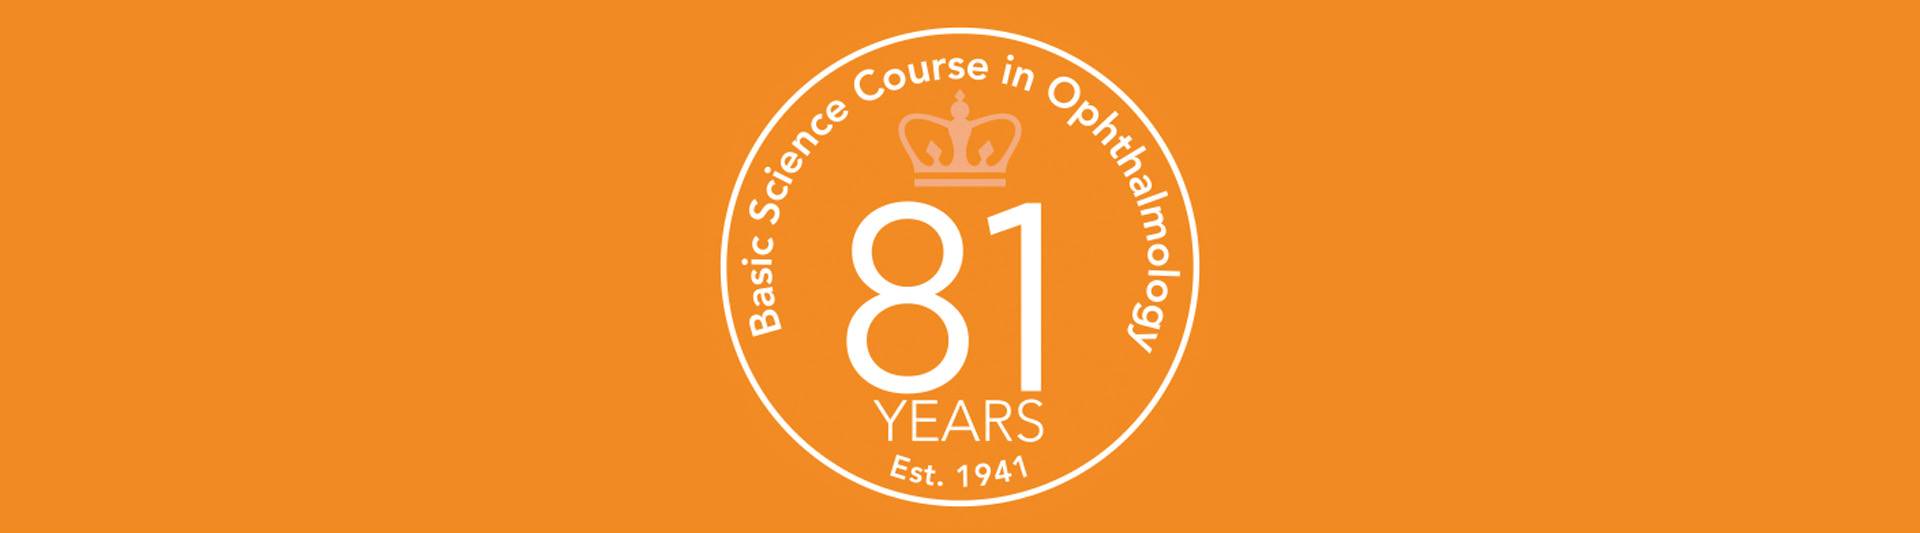 Basic Science Course in Ophthalmology